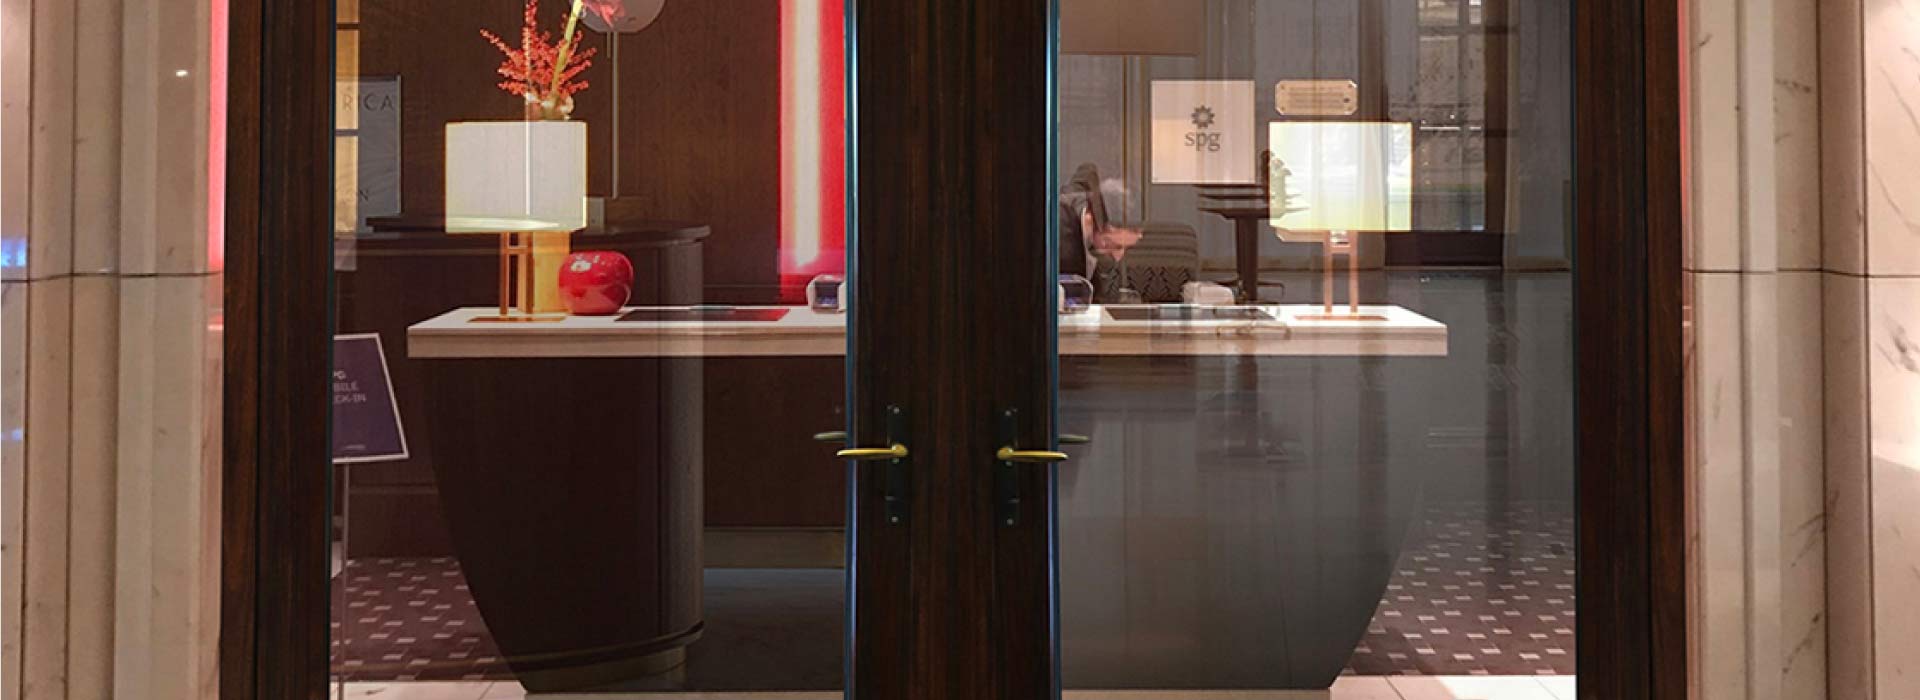 Solid Wood – S.23 French Glass Door System